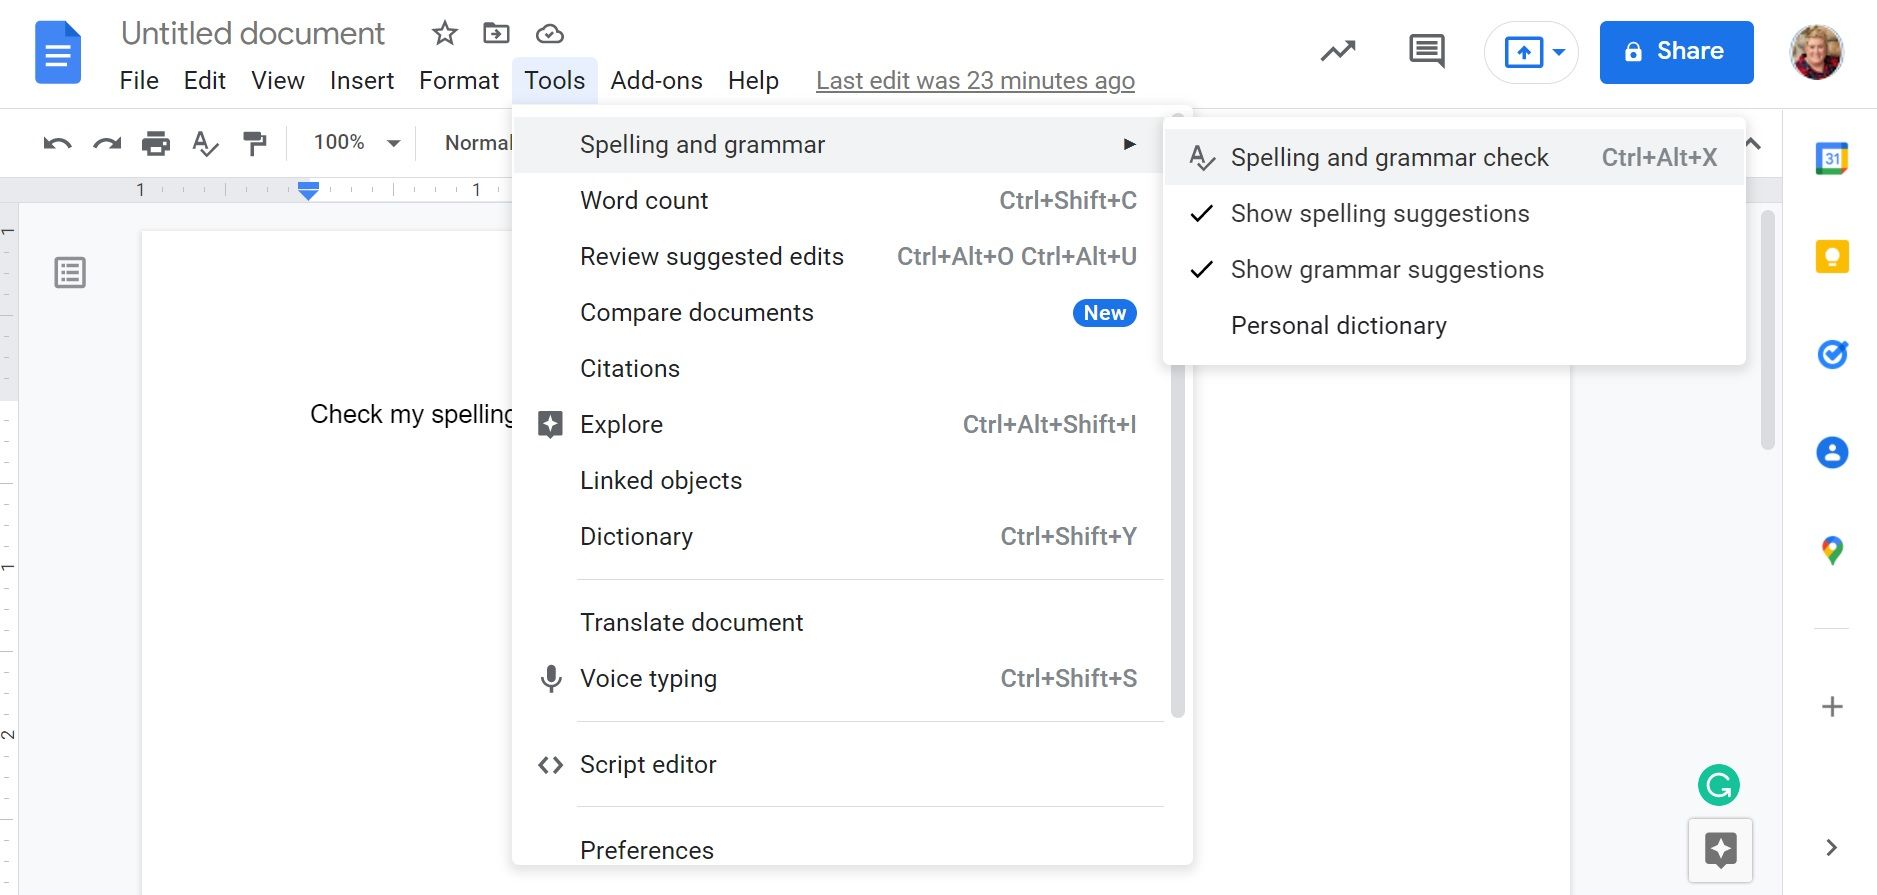 Image shows the spell check inside Google Docs